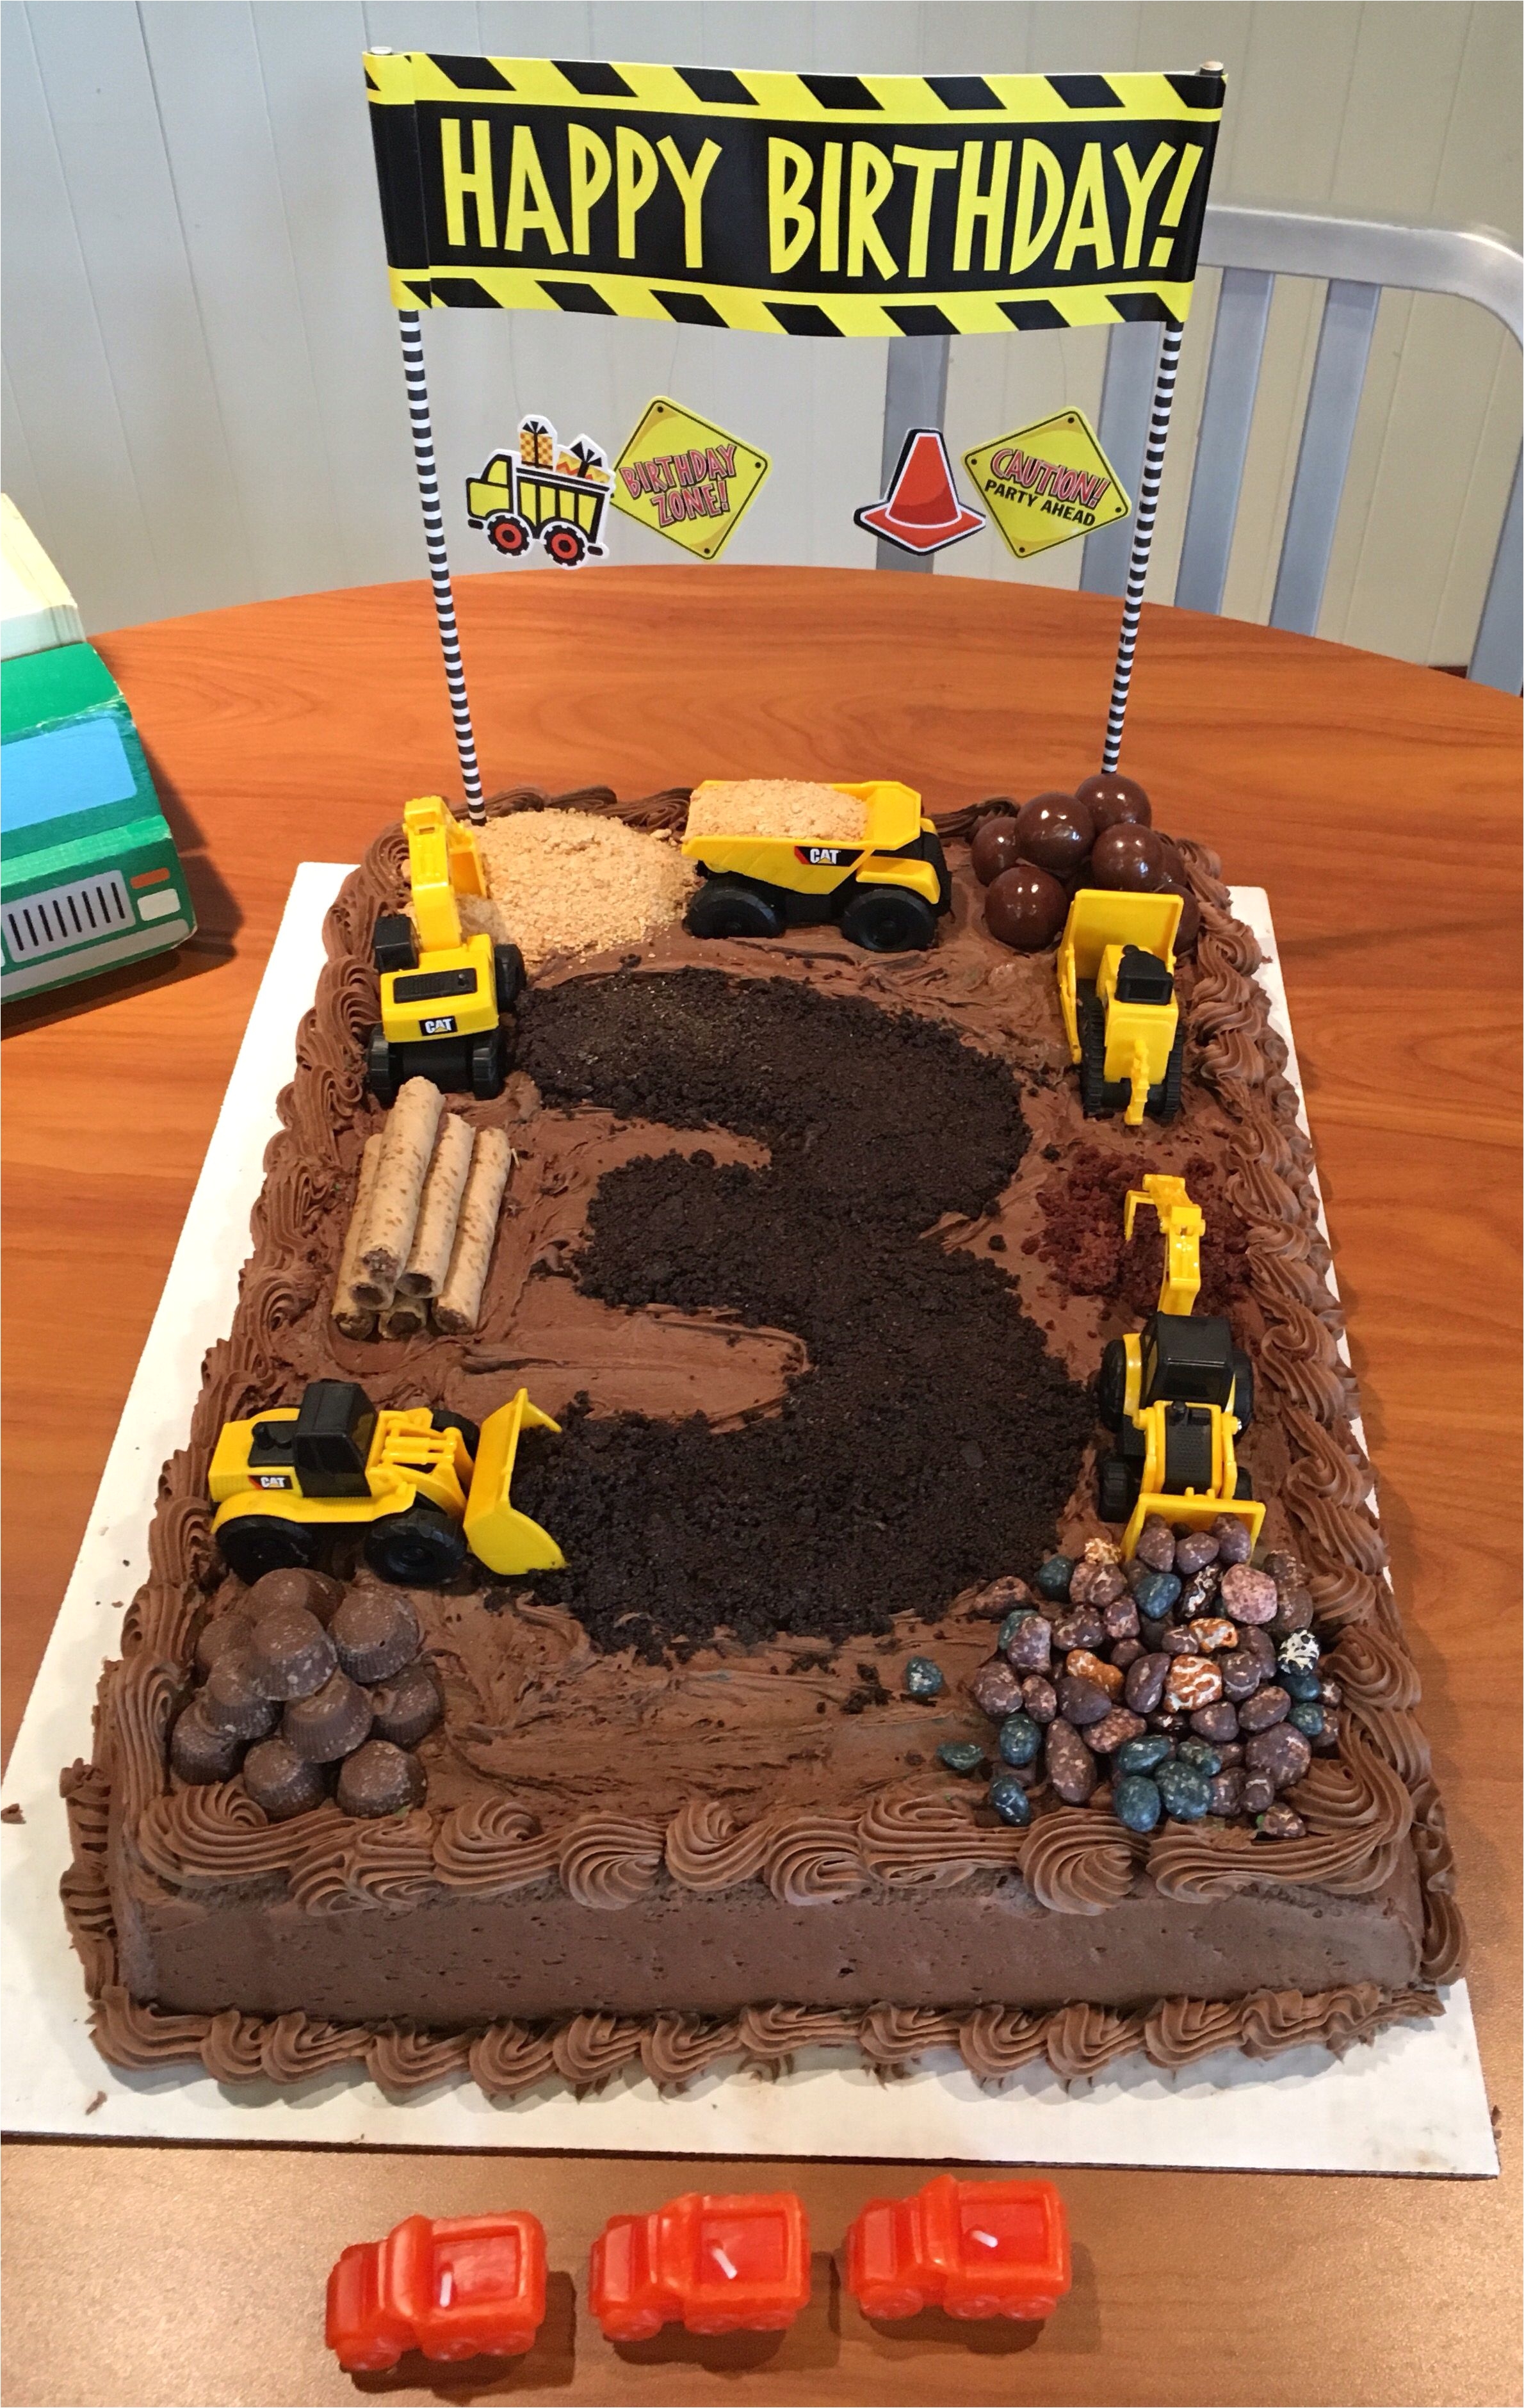 carter s construction cake got a sheet cake from costco chocolate candies from winco s bulk bins the 3 is crushed oreo the sand is graham cracker